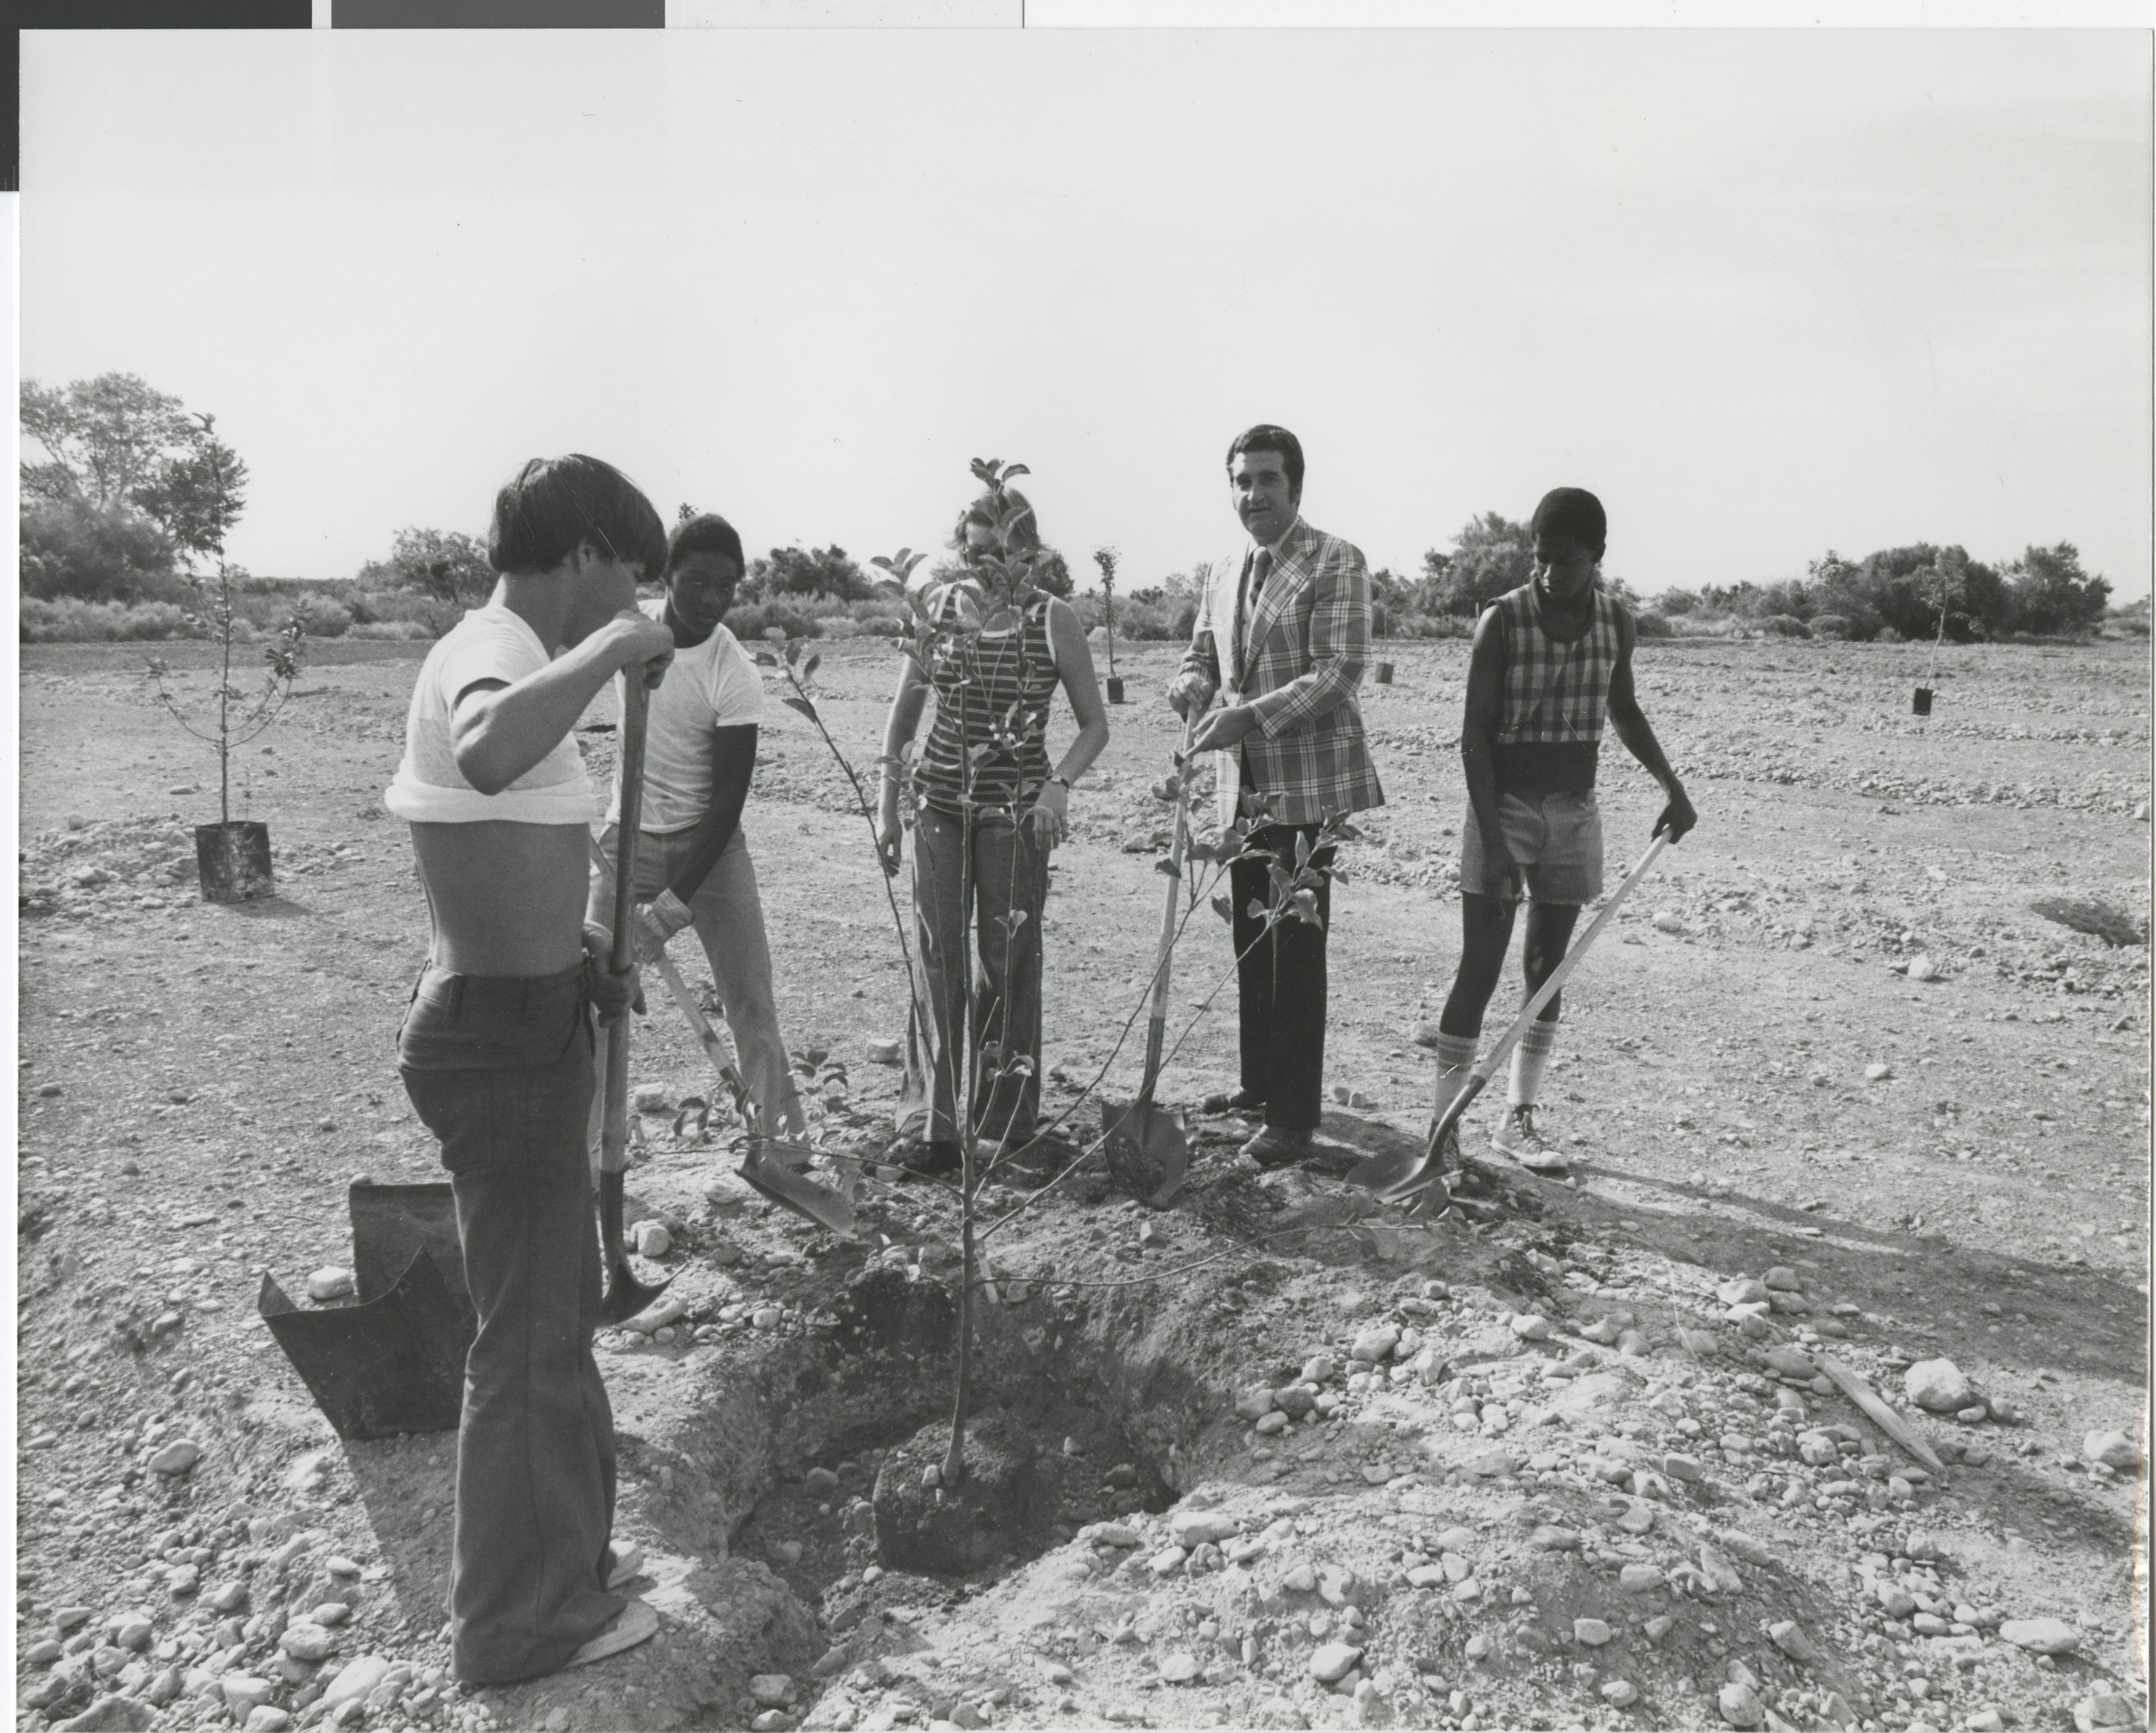 Photograph of Ron Lurie with community members planting trees